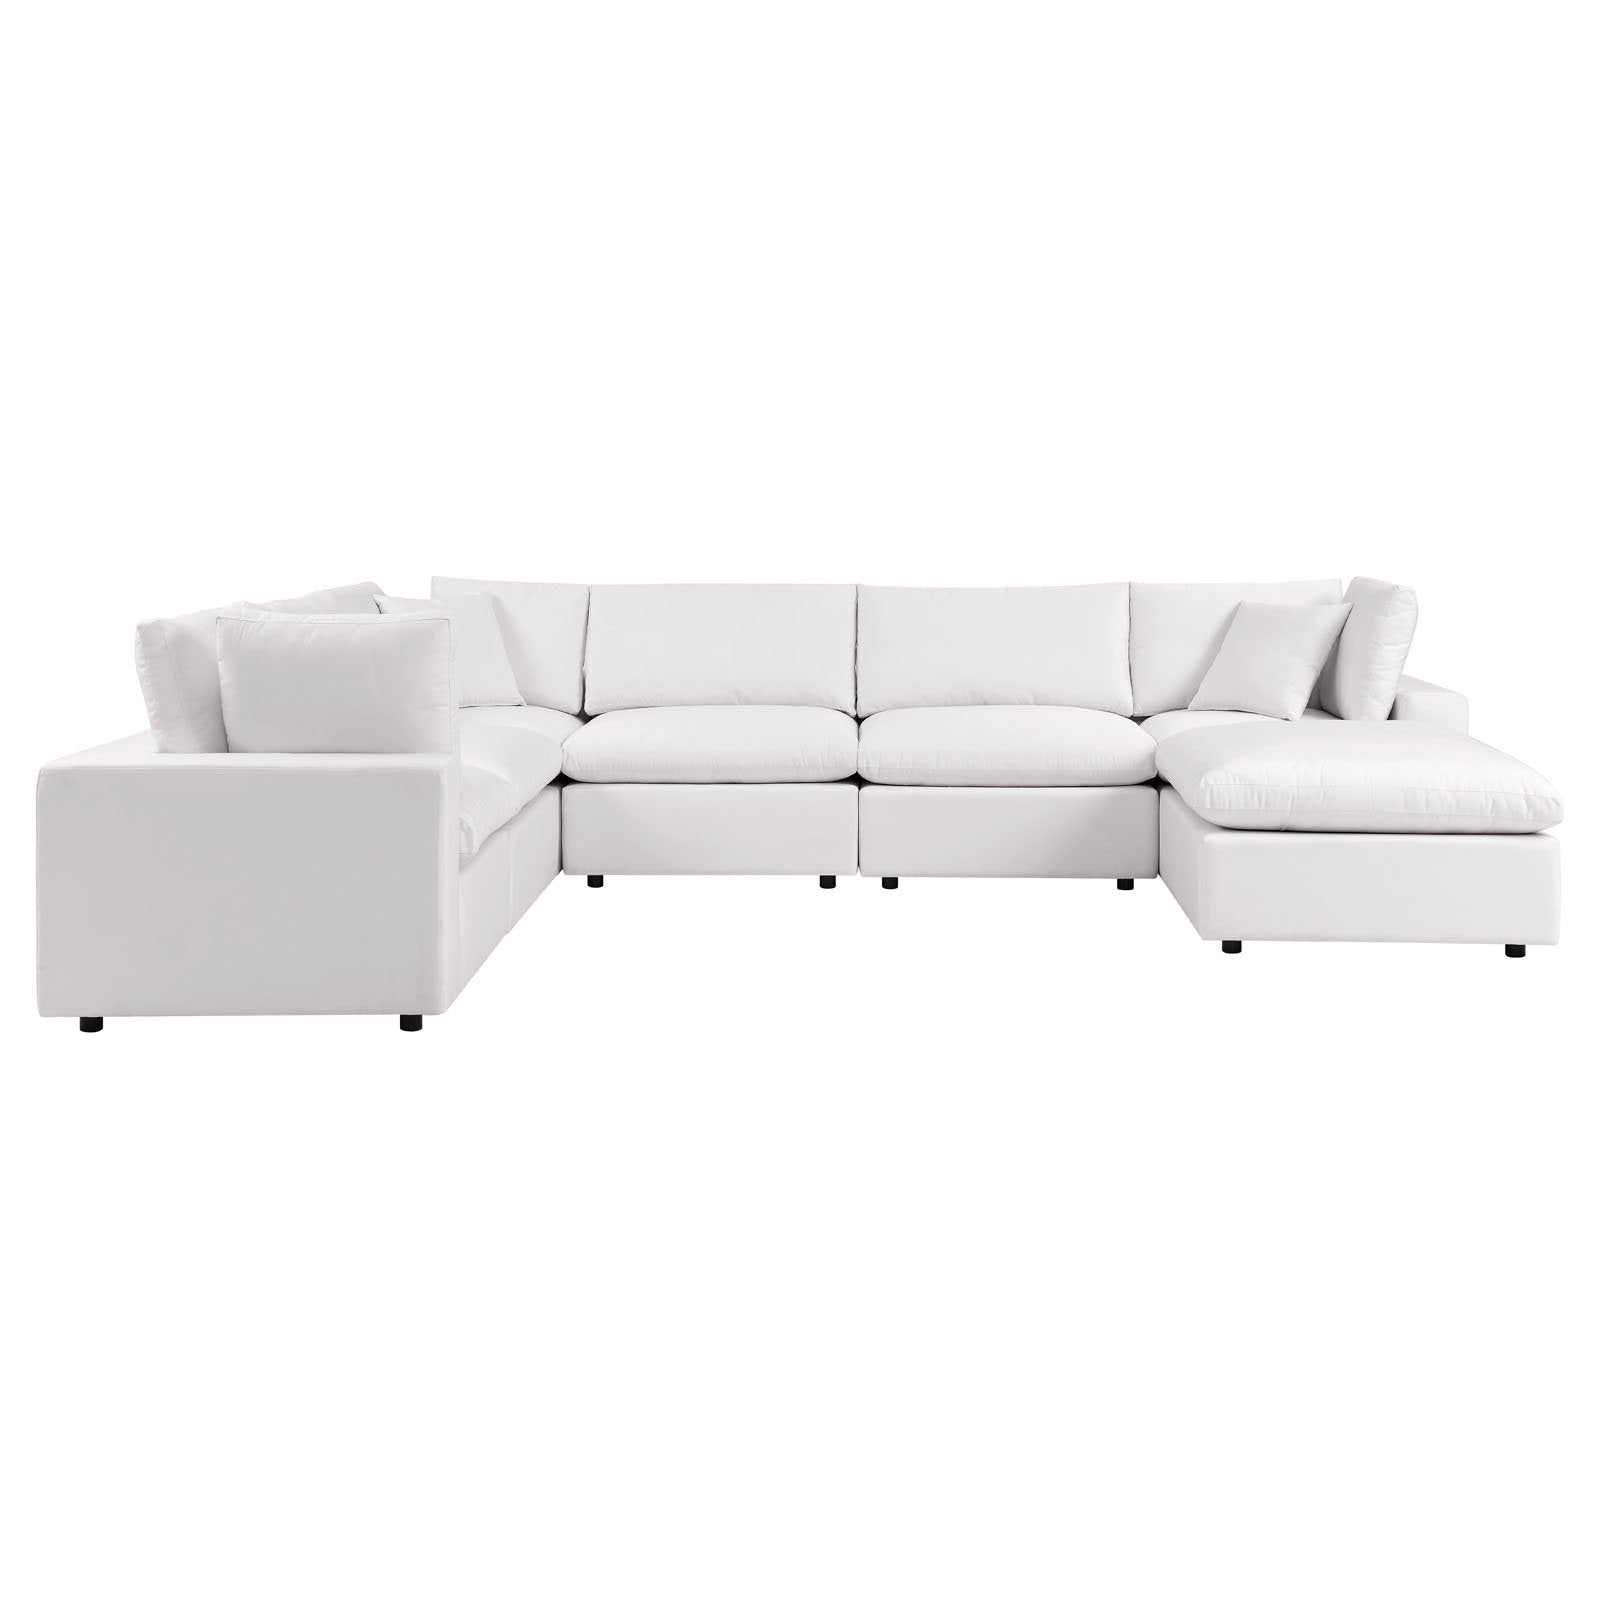 Commix 7-Piece Outdoor Patio Sectional Sofa